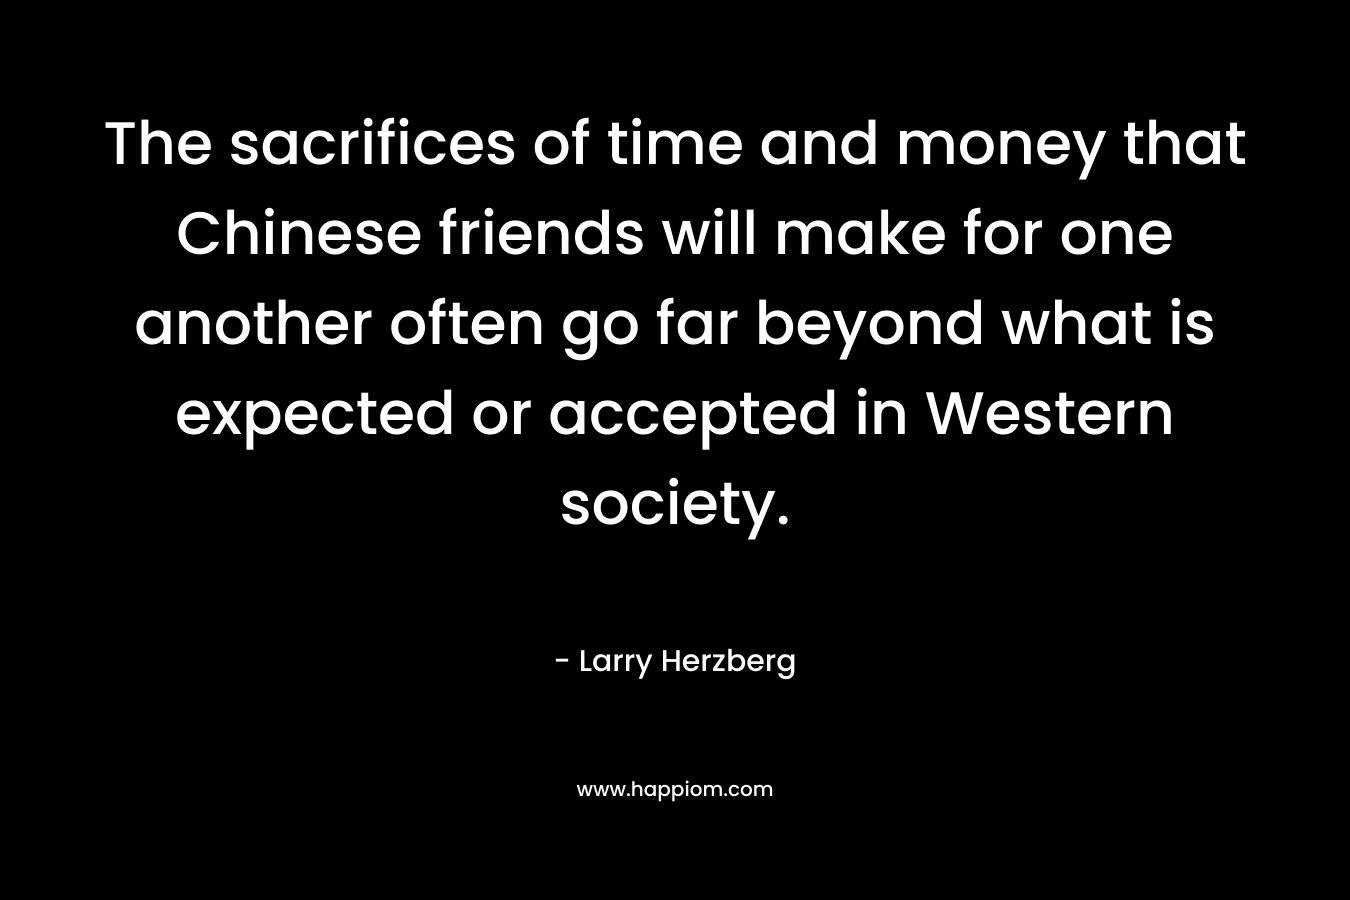 The sacrifices of time and money that Chinese friends will make for one another often go far beyond what is expected or accepted in Western society. – Larry Herzberg